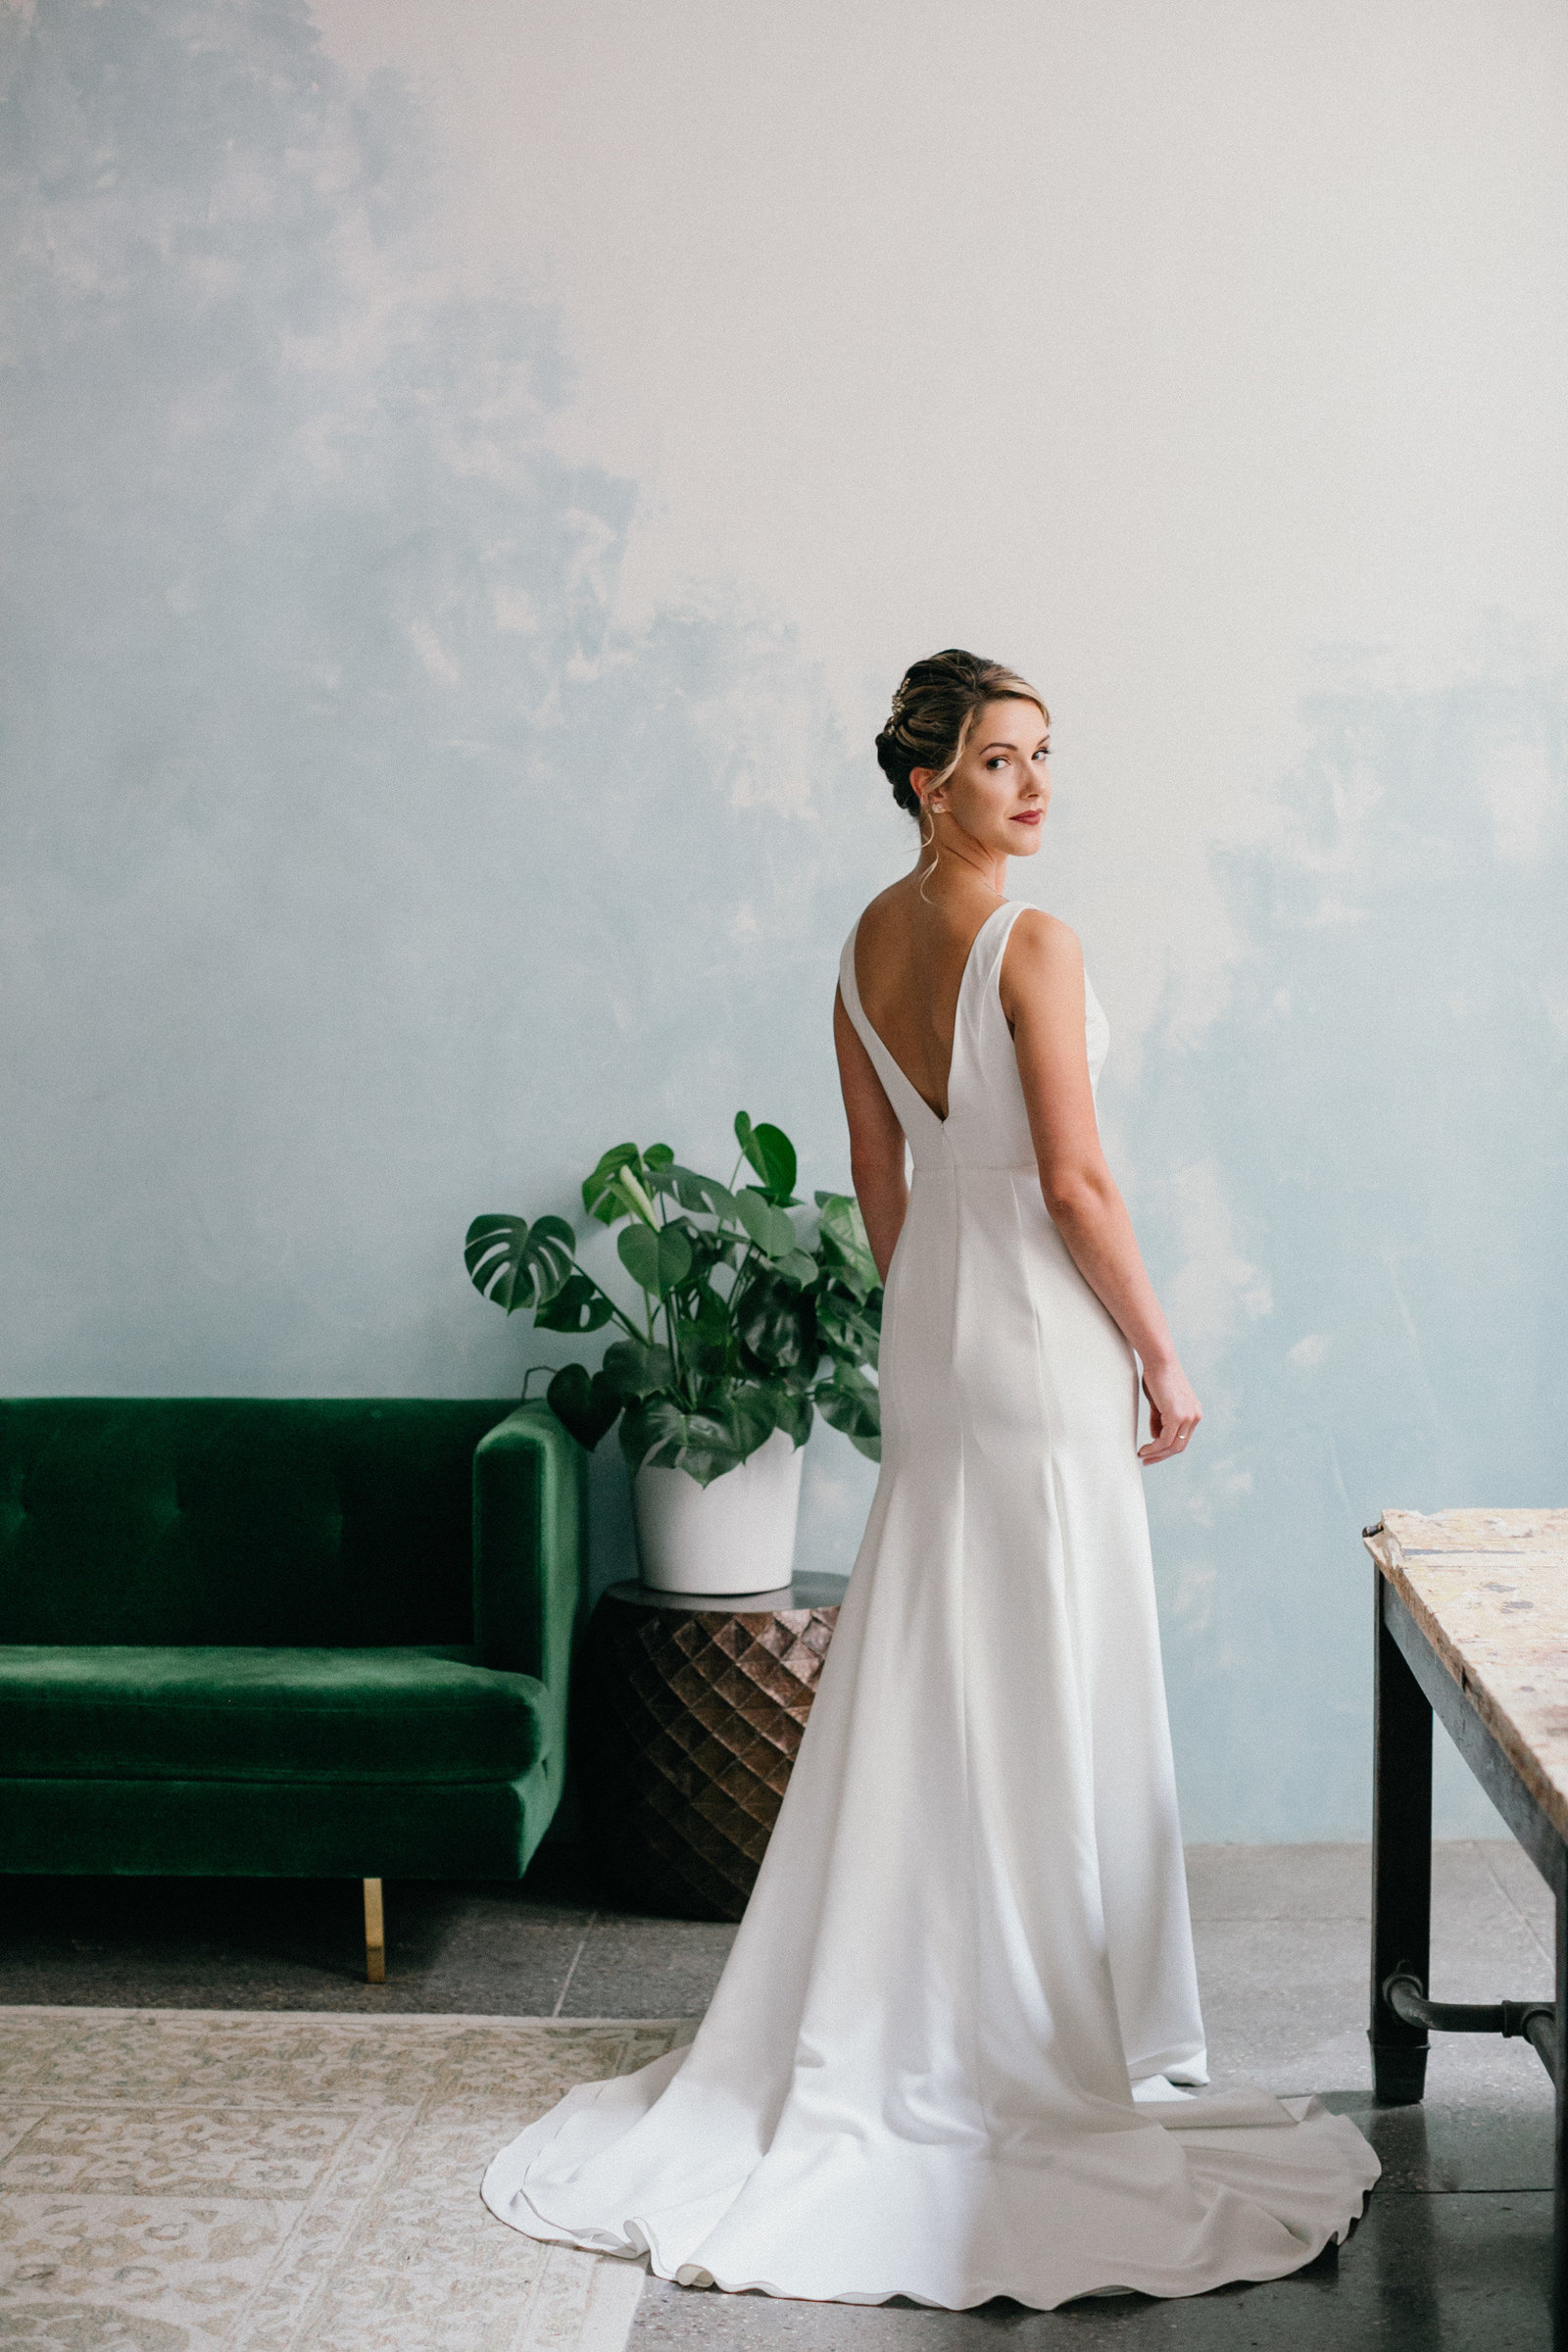 This Philadelphia bride looking like bridal perfection in this Sara Seven wedding Gown from Lovely Bride Philadelphia.